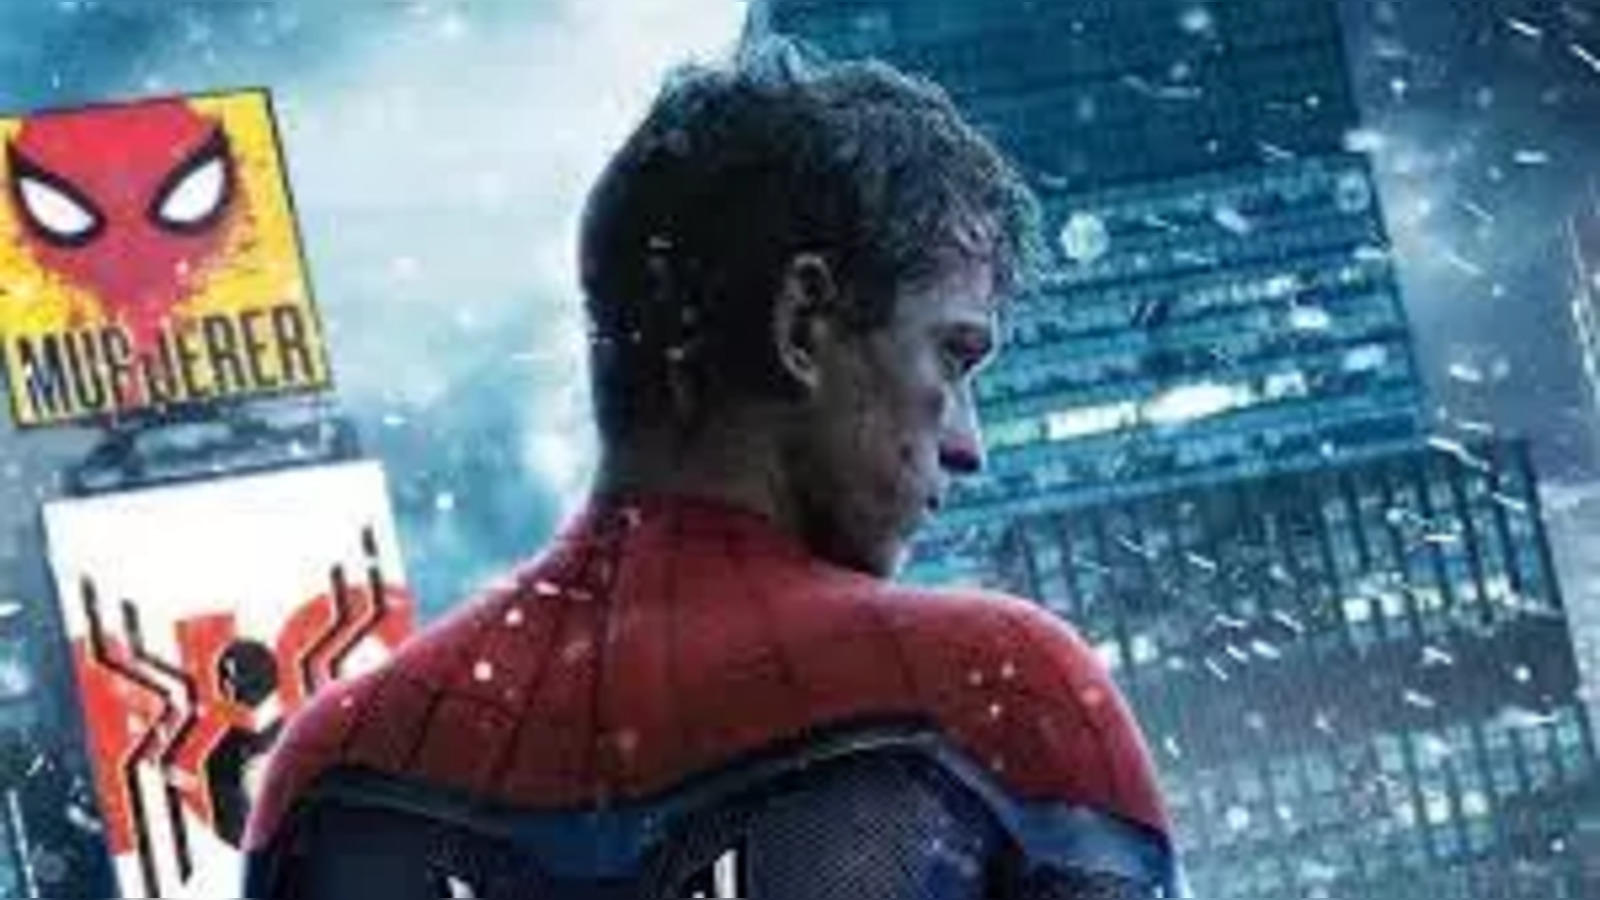 Spider-Man is joining Marvel's Cinematic Universe, Sony and Marvel confirm  - Polygon